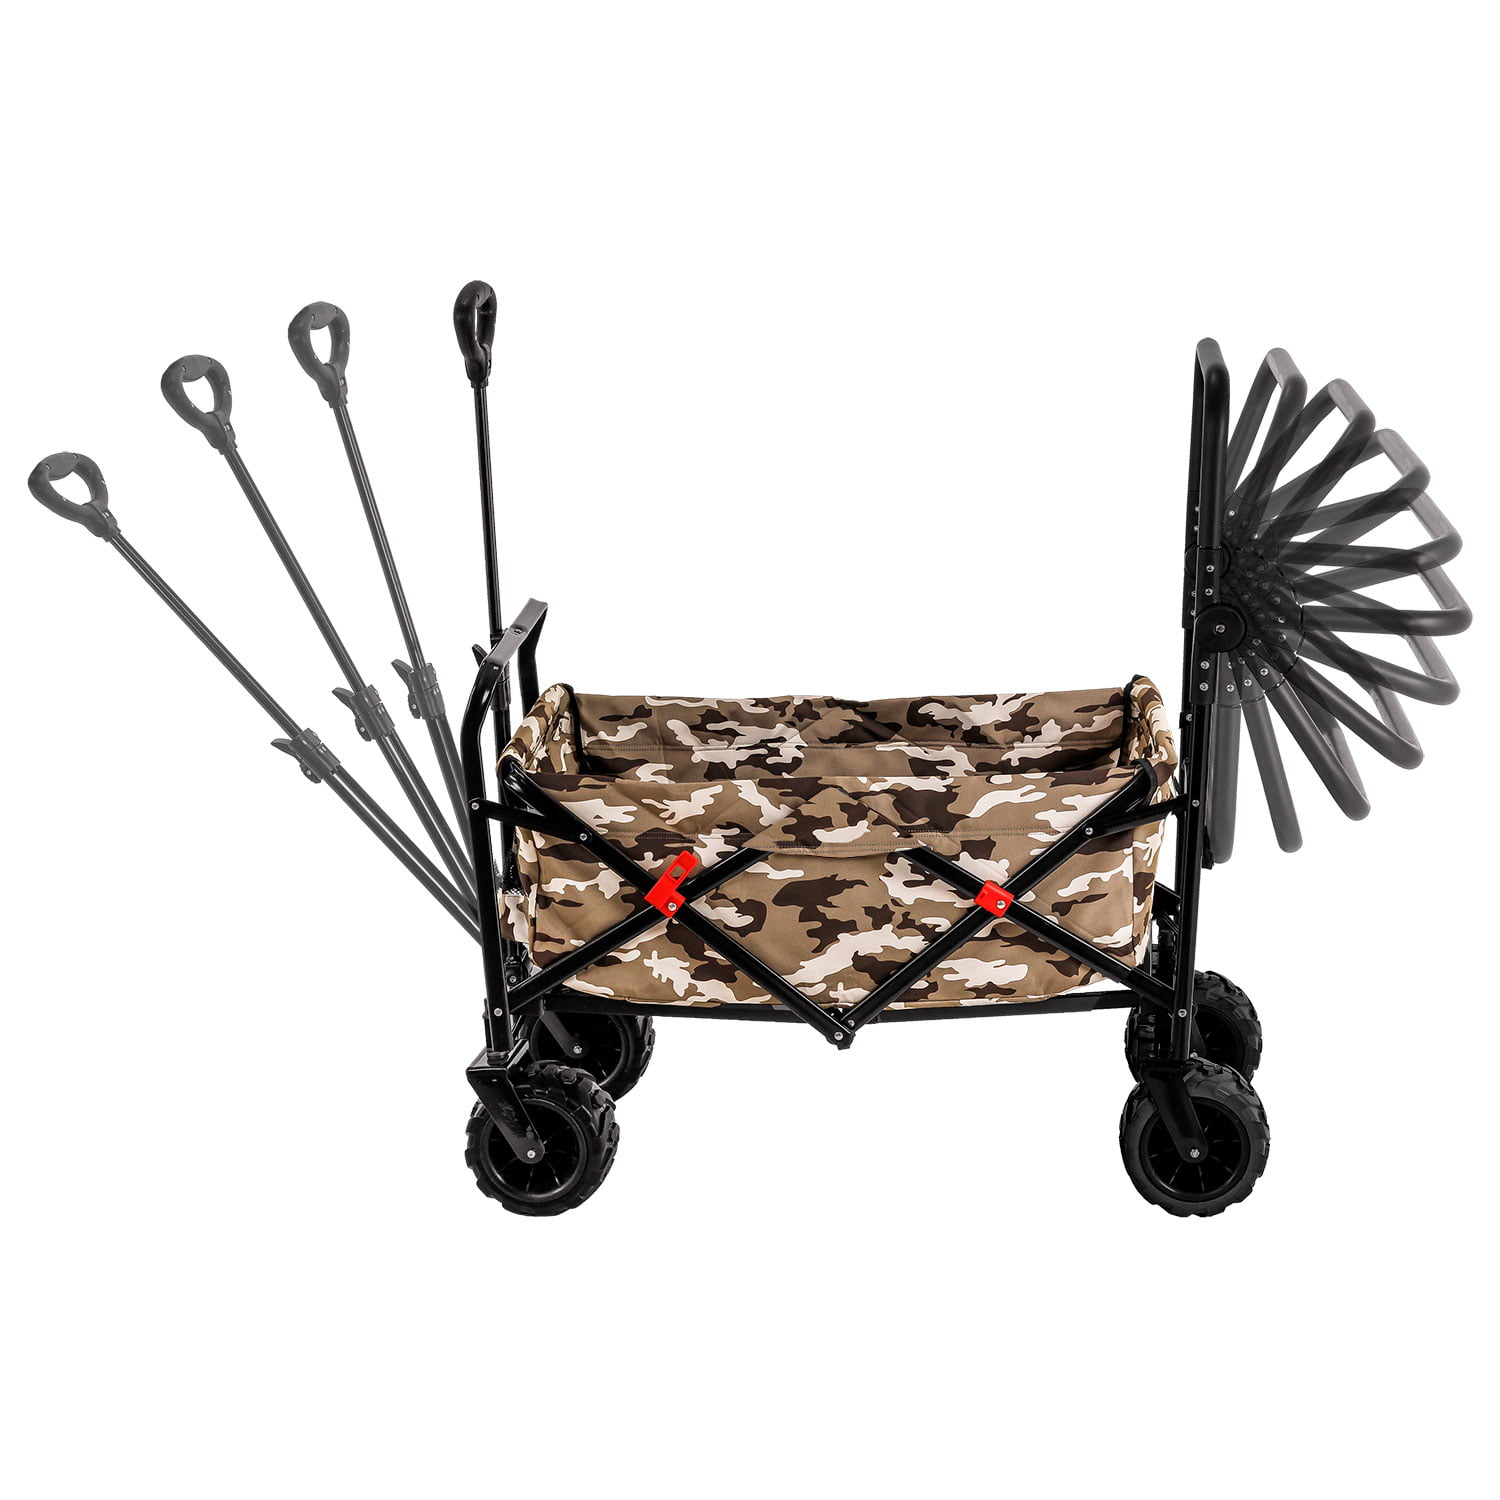 Picnic Garden Camouflage Wide Wheel Wagon All Terrain Folding Collapsible Utility Wagon with Push Bar Beach Sporting Events Portable Rolling Heavy Duty 265 Lb Capacity Canvas Fabric Cart Buggy